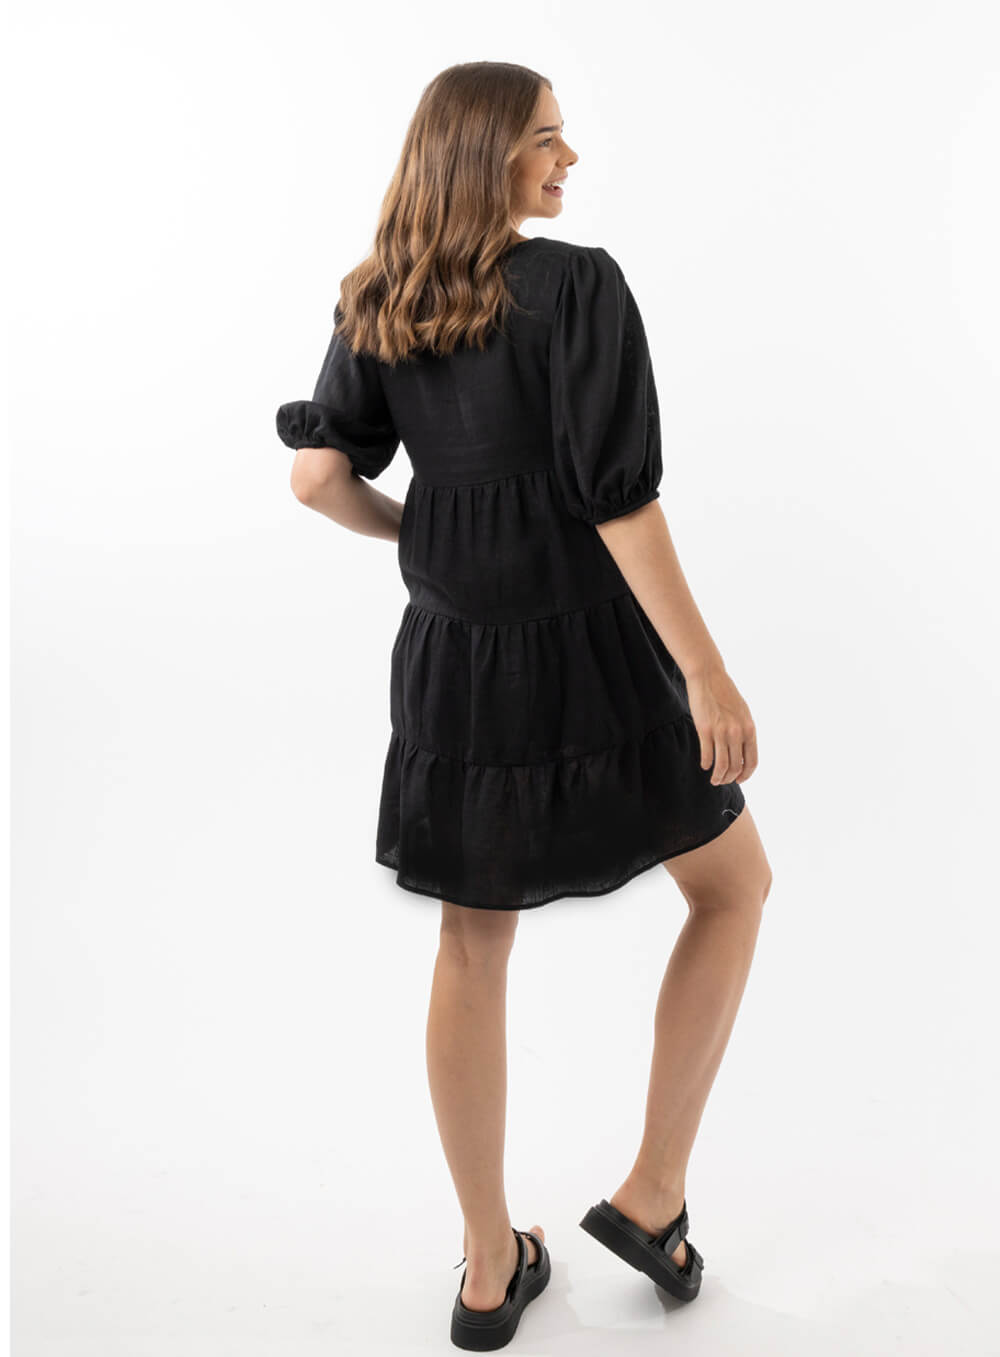 The Eleanor mini dress in black features a flowing layered a line shape with draping linen/viscose fabric, puff 3/4 sleeves with elastic cuff which can be pushed up to the elbow, a dropped v shape neckline with a square finish.